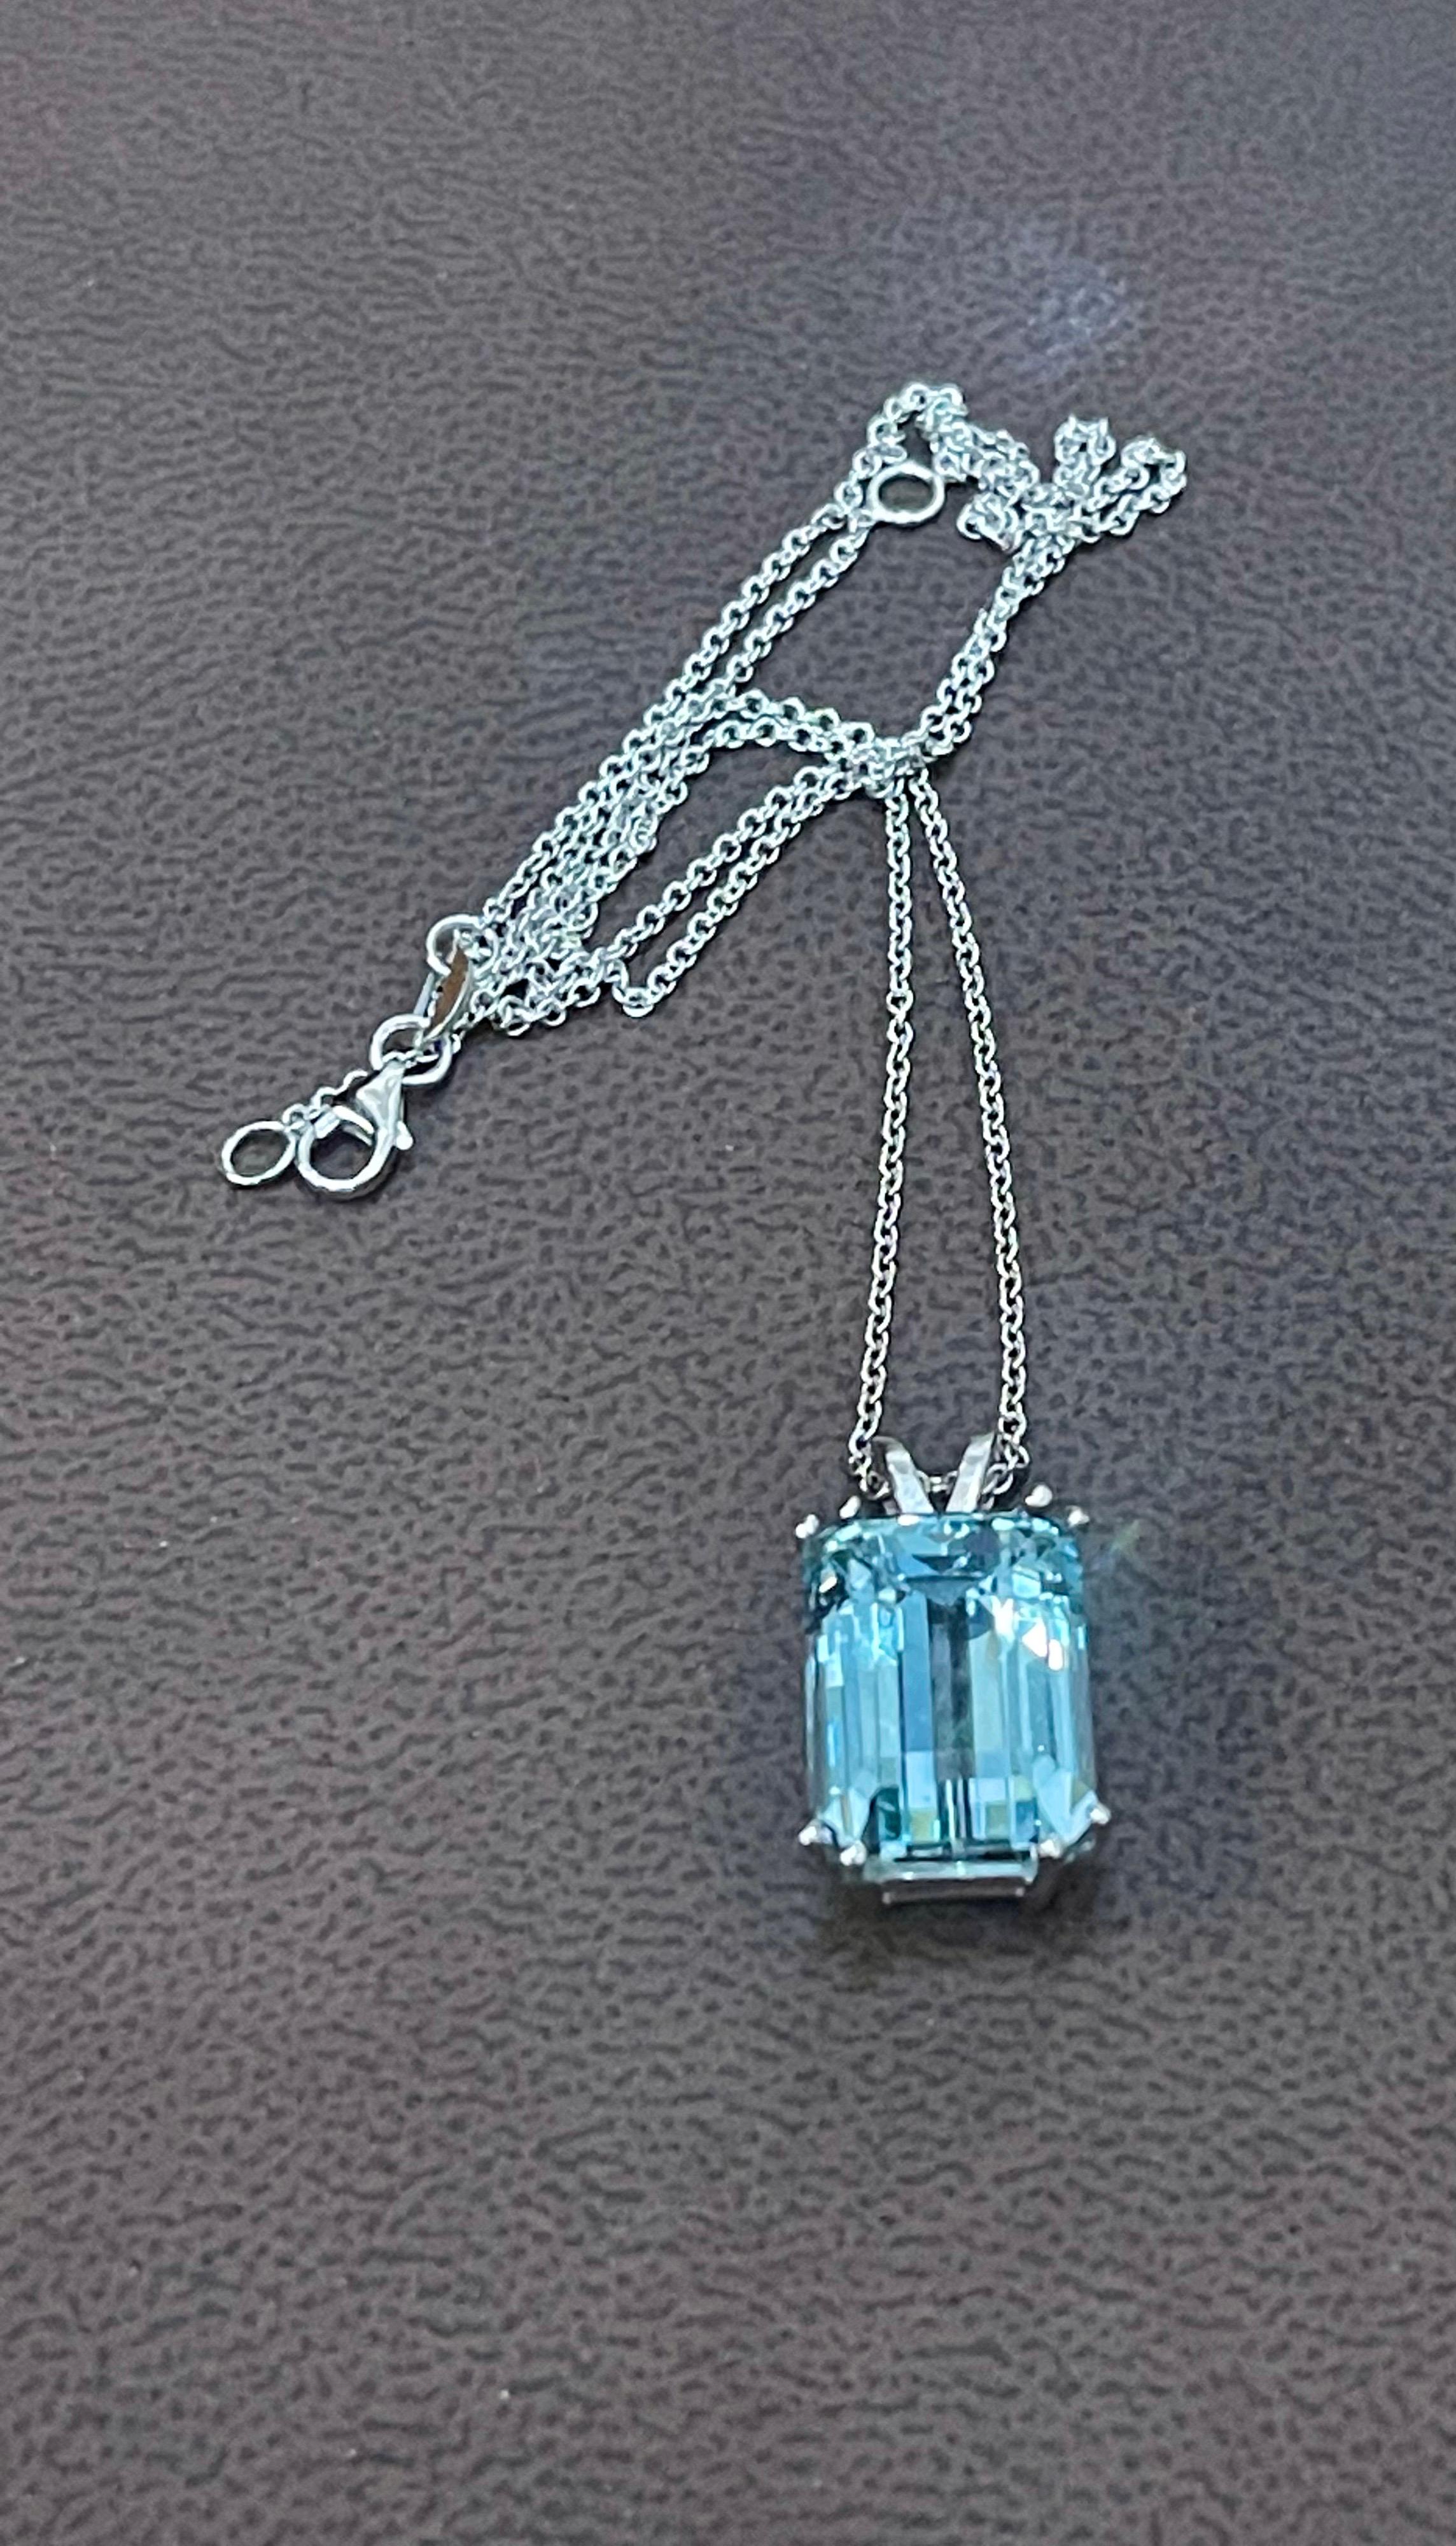 6 Carat Emerald Cut Aquamarine Pendant / Necklace 14 Karat White Gold In Excellent Condition In New York, NY